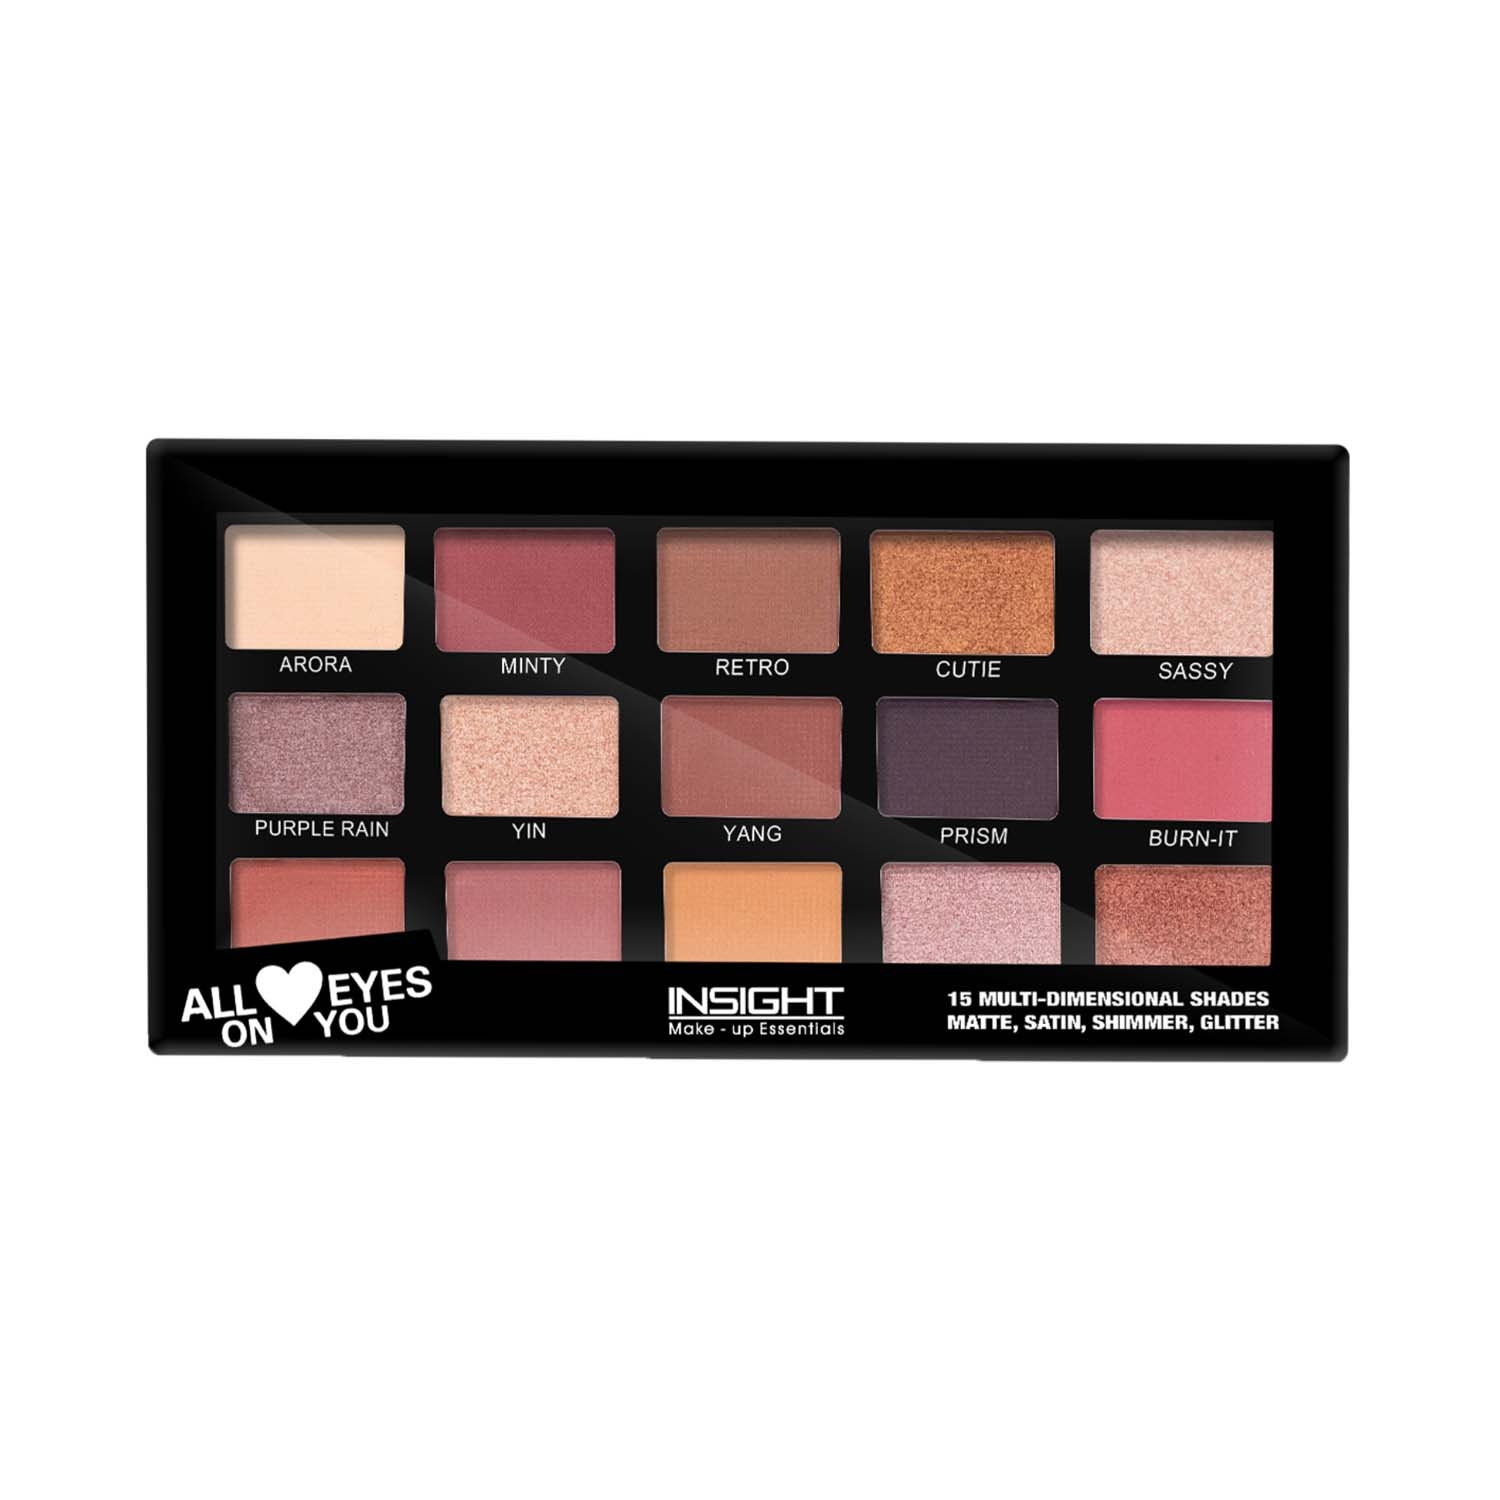 Insight Cosmetics | Insight Cosmetics All Eyes On You Eyeshadow Palette - Multi-Color (17g)